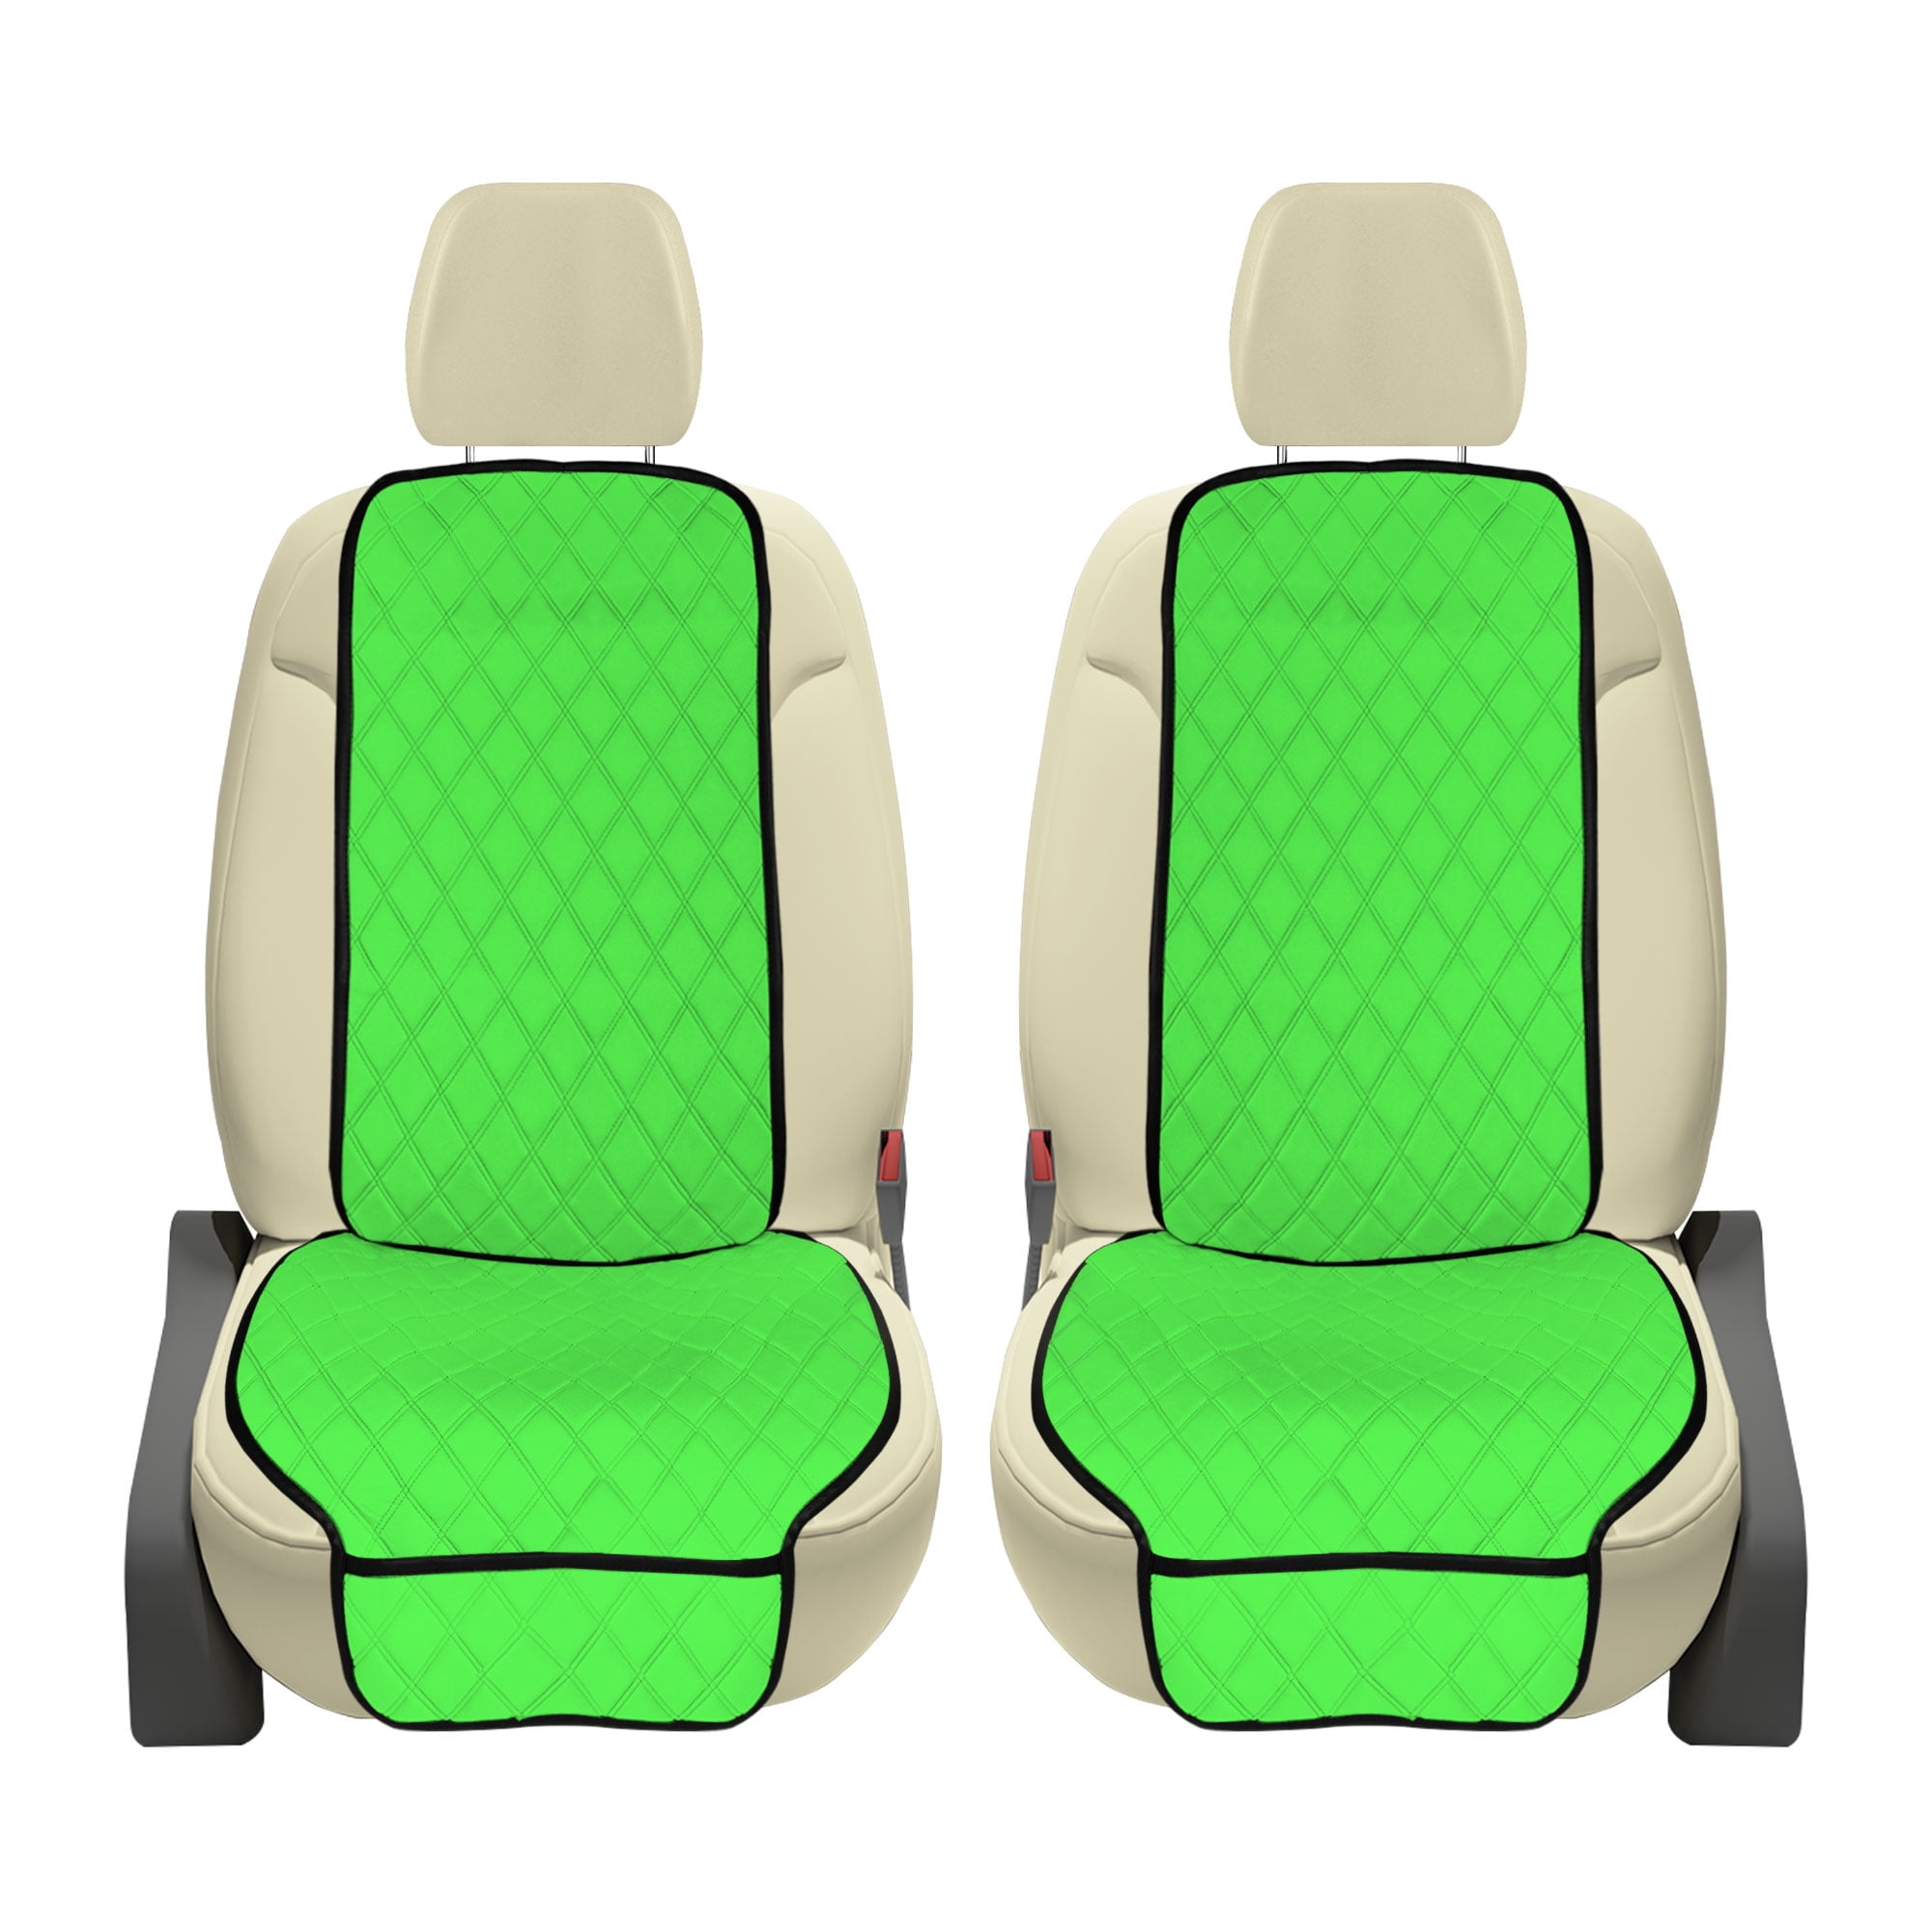 GetUSCart- Seat Cover for Car, 2 Pack Car Front Seat Protector